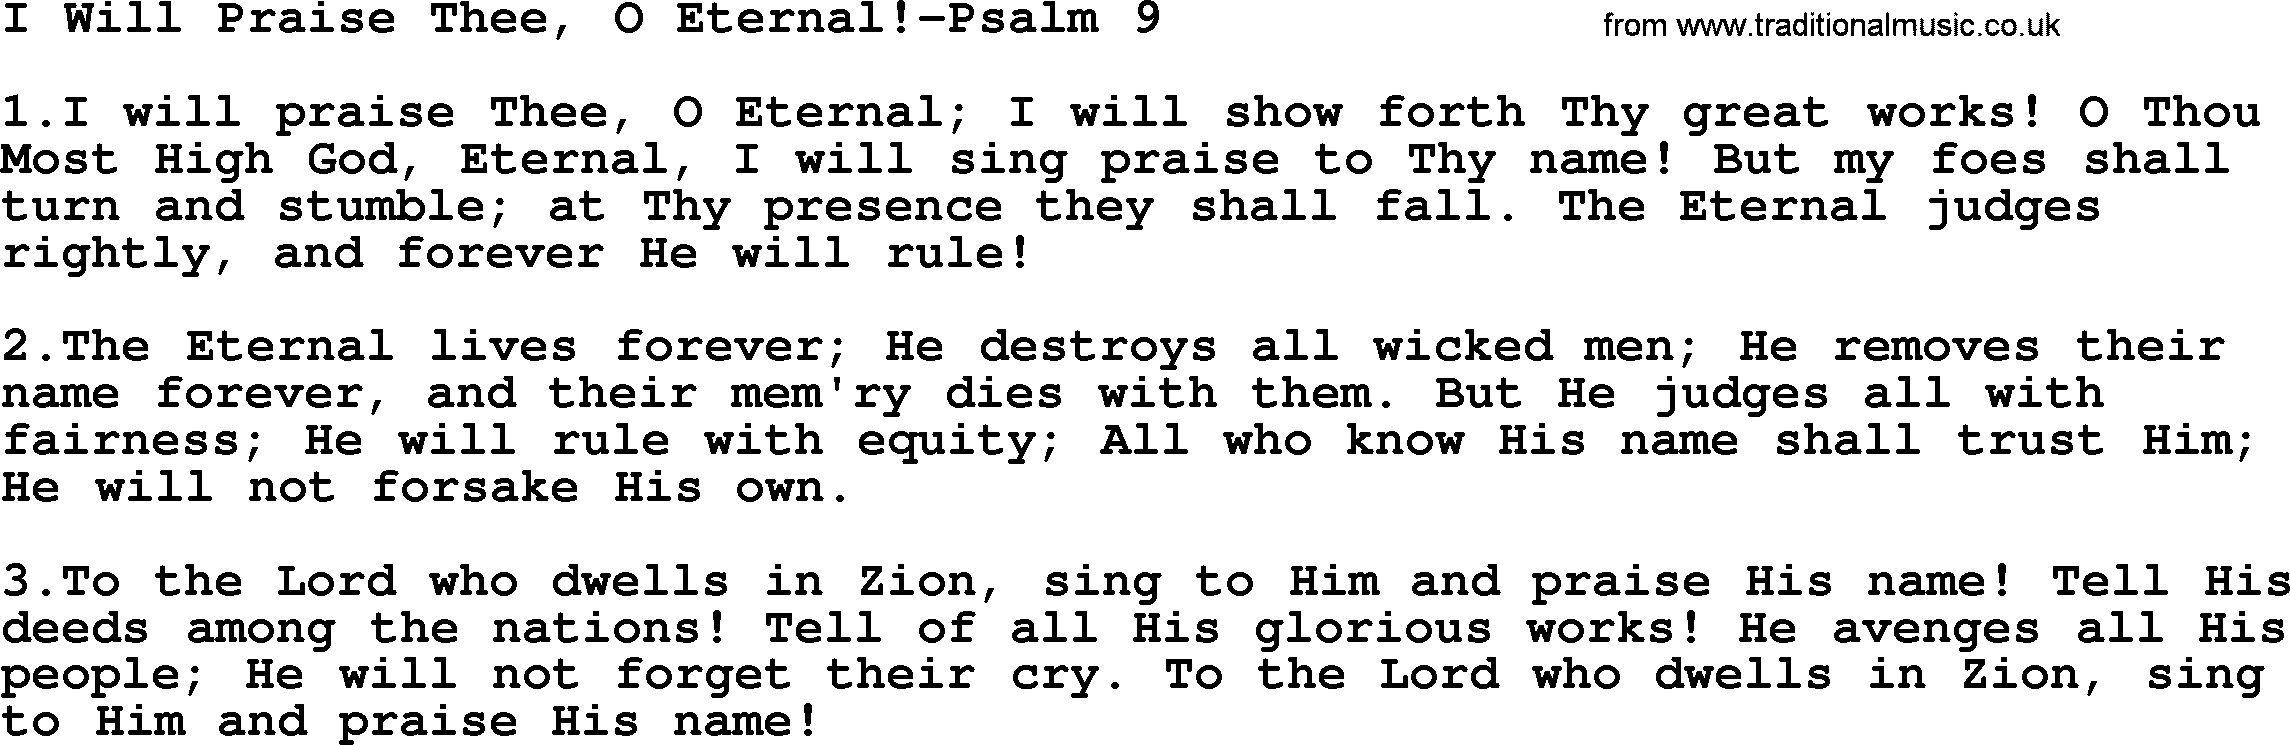 Hymns from the Psalms, Hymn: I Will Praise Thee, O Eternal!-Psalm 9, lyrics with PDF